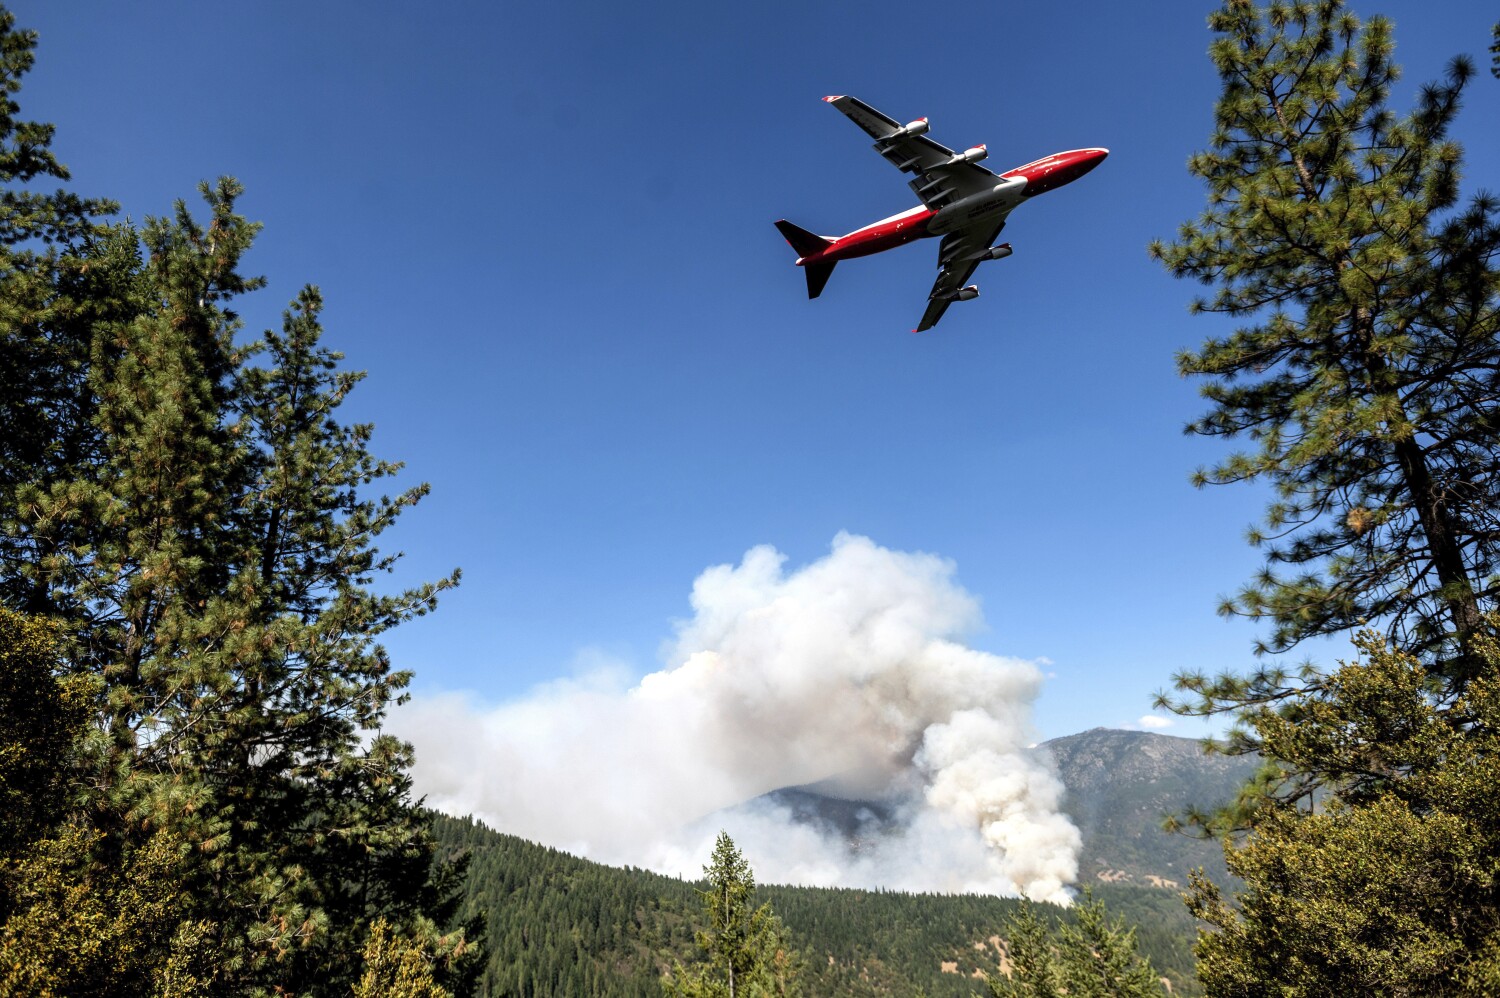 August Complex fire burns record-breaking 1 million acres